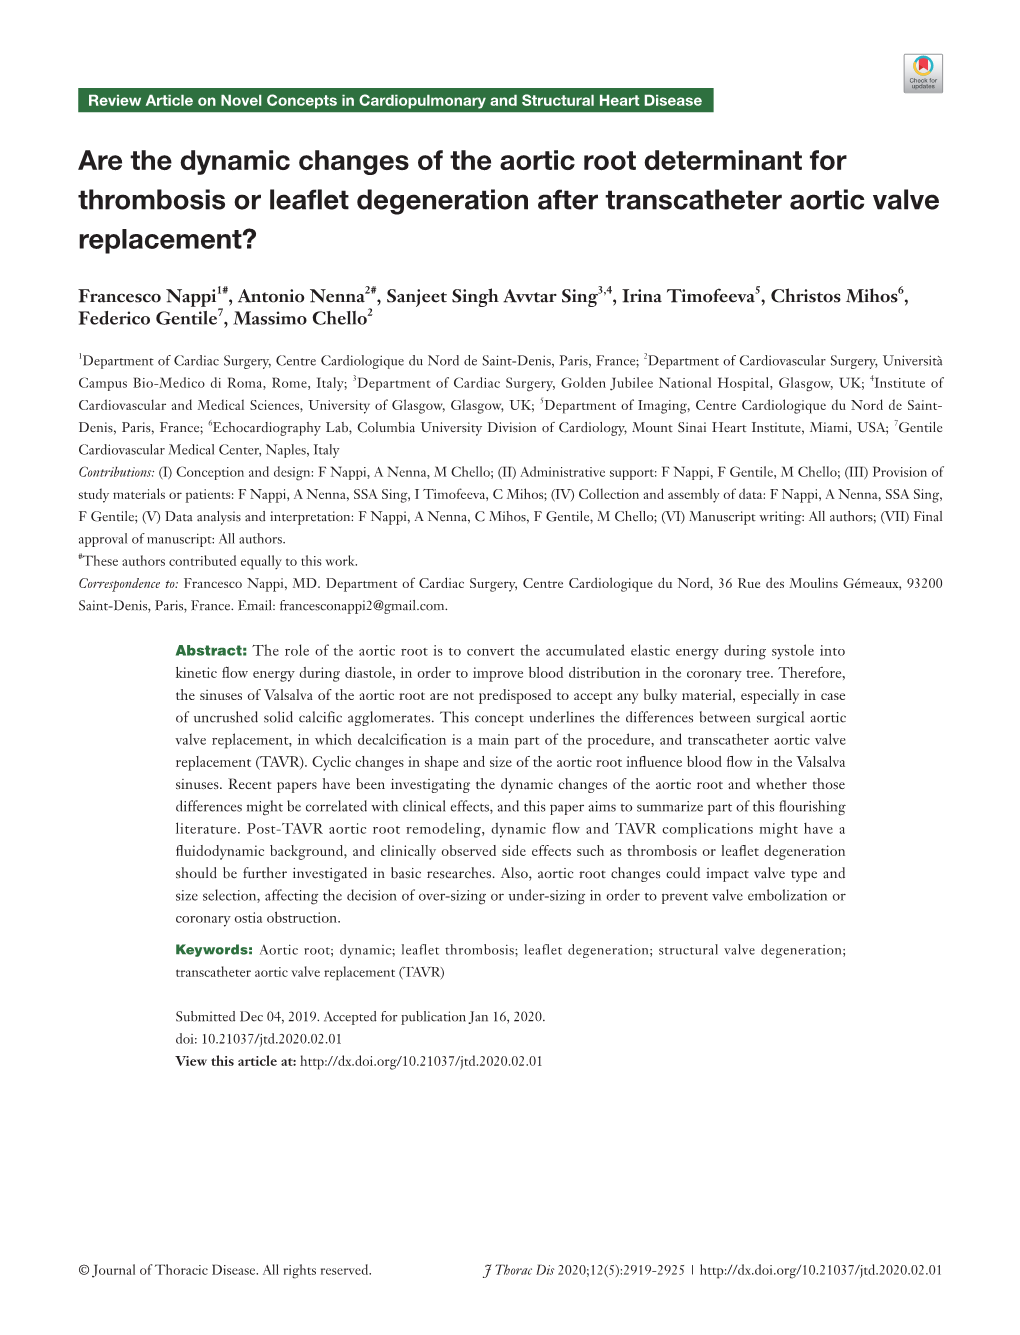 Are the Dynamic Changes of the Aortic Root Determinant for Thrombosis Or Leaflet Degeneration After Transcatheter Aortic Valve Replacement?